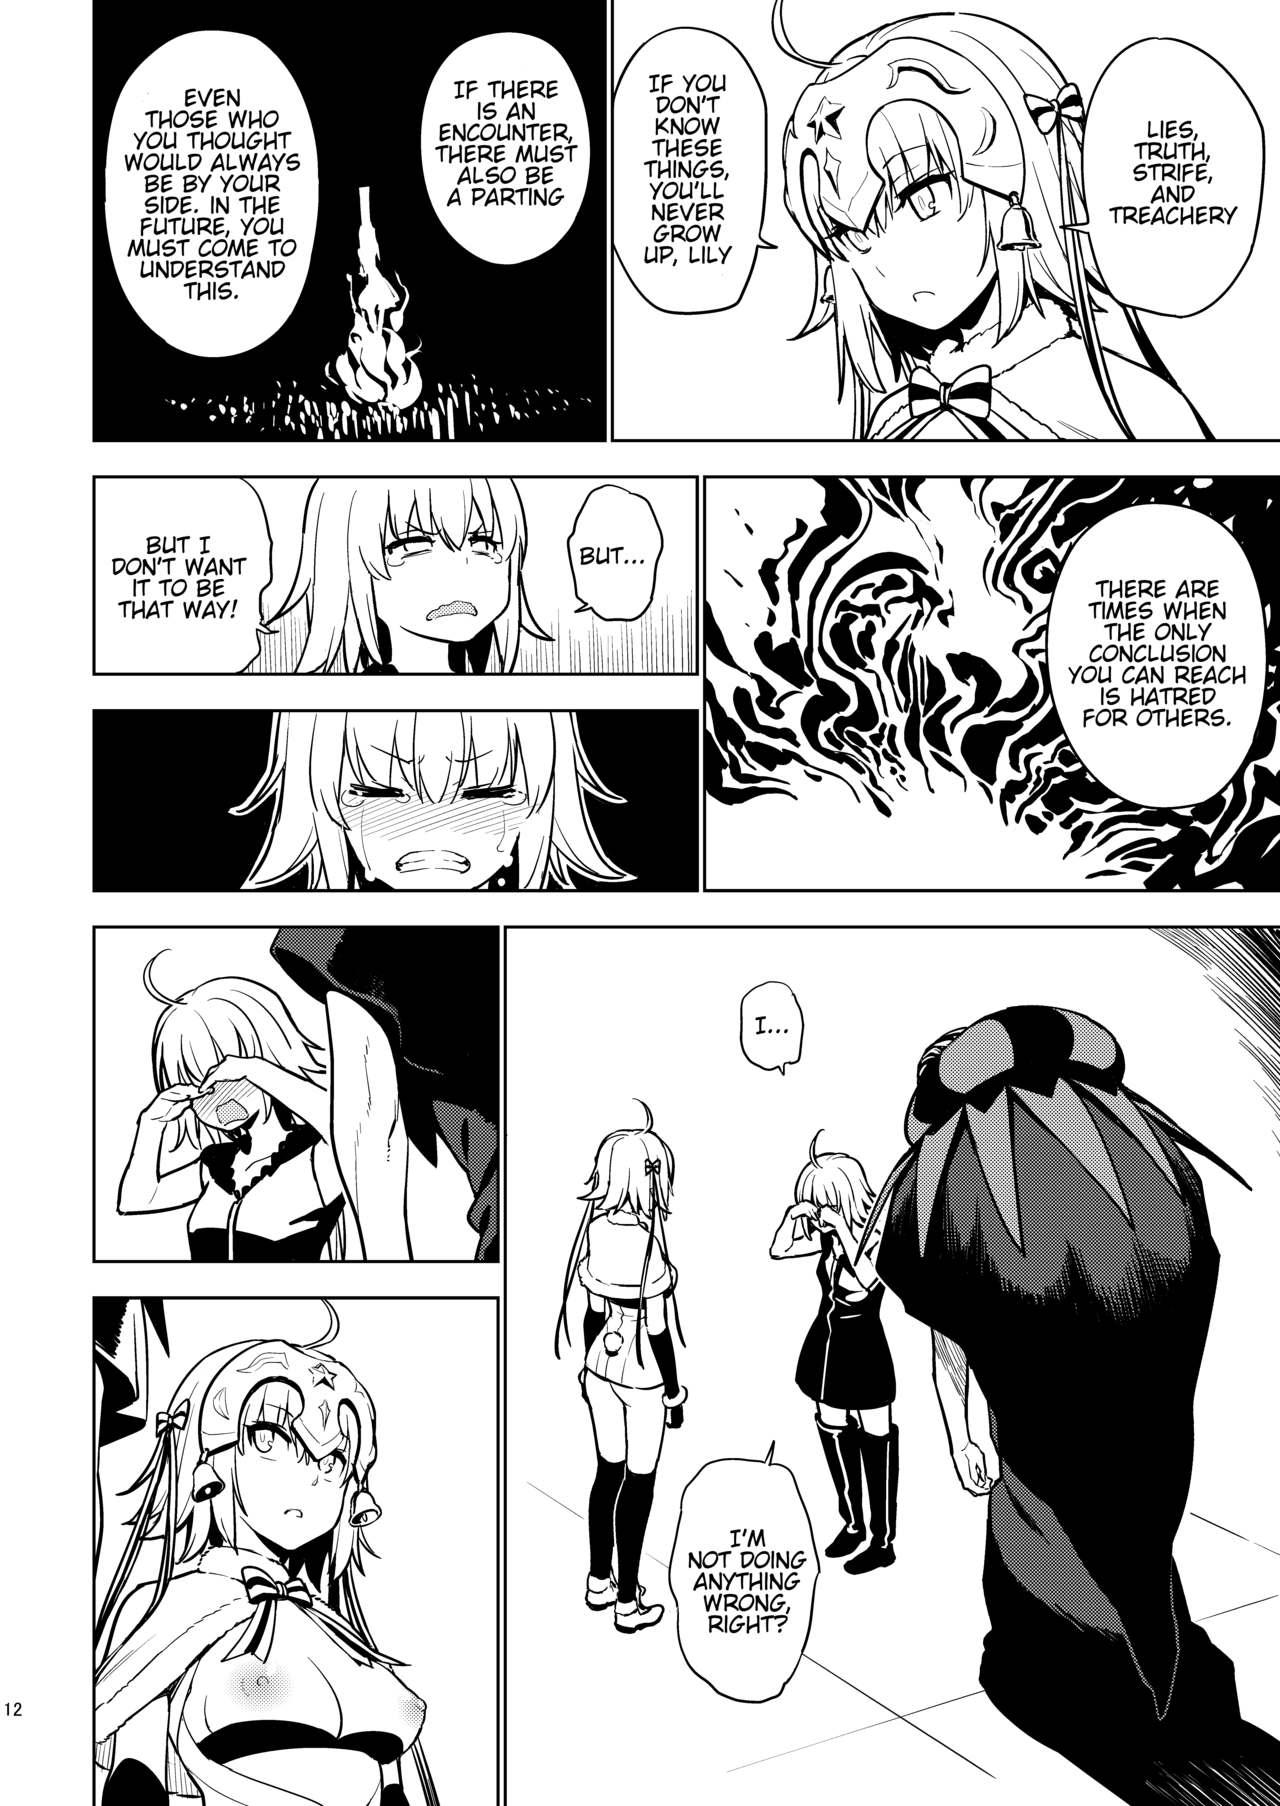 Topless SO BORED - Fate grand order Blow Jobs Porn - Page 10